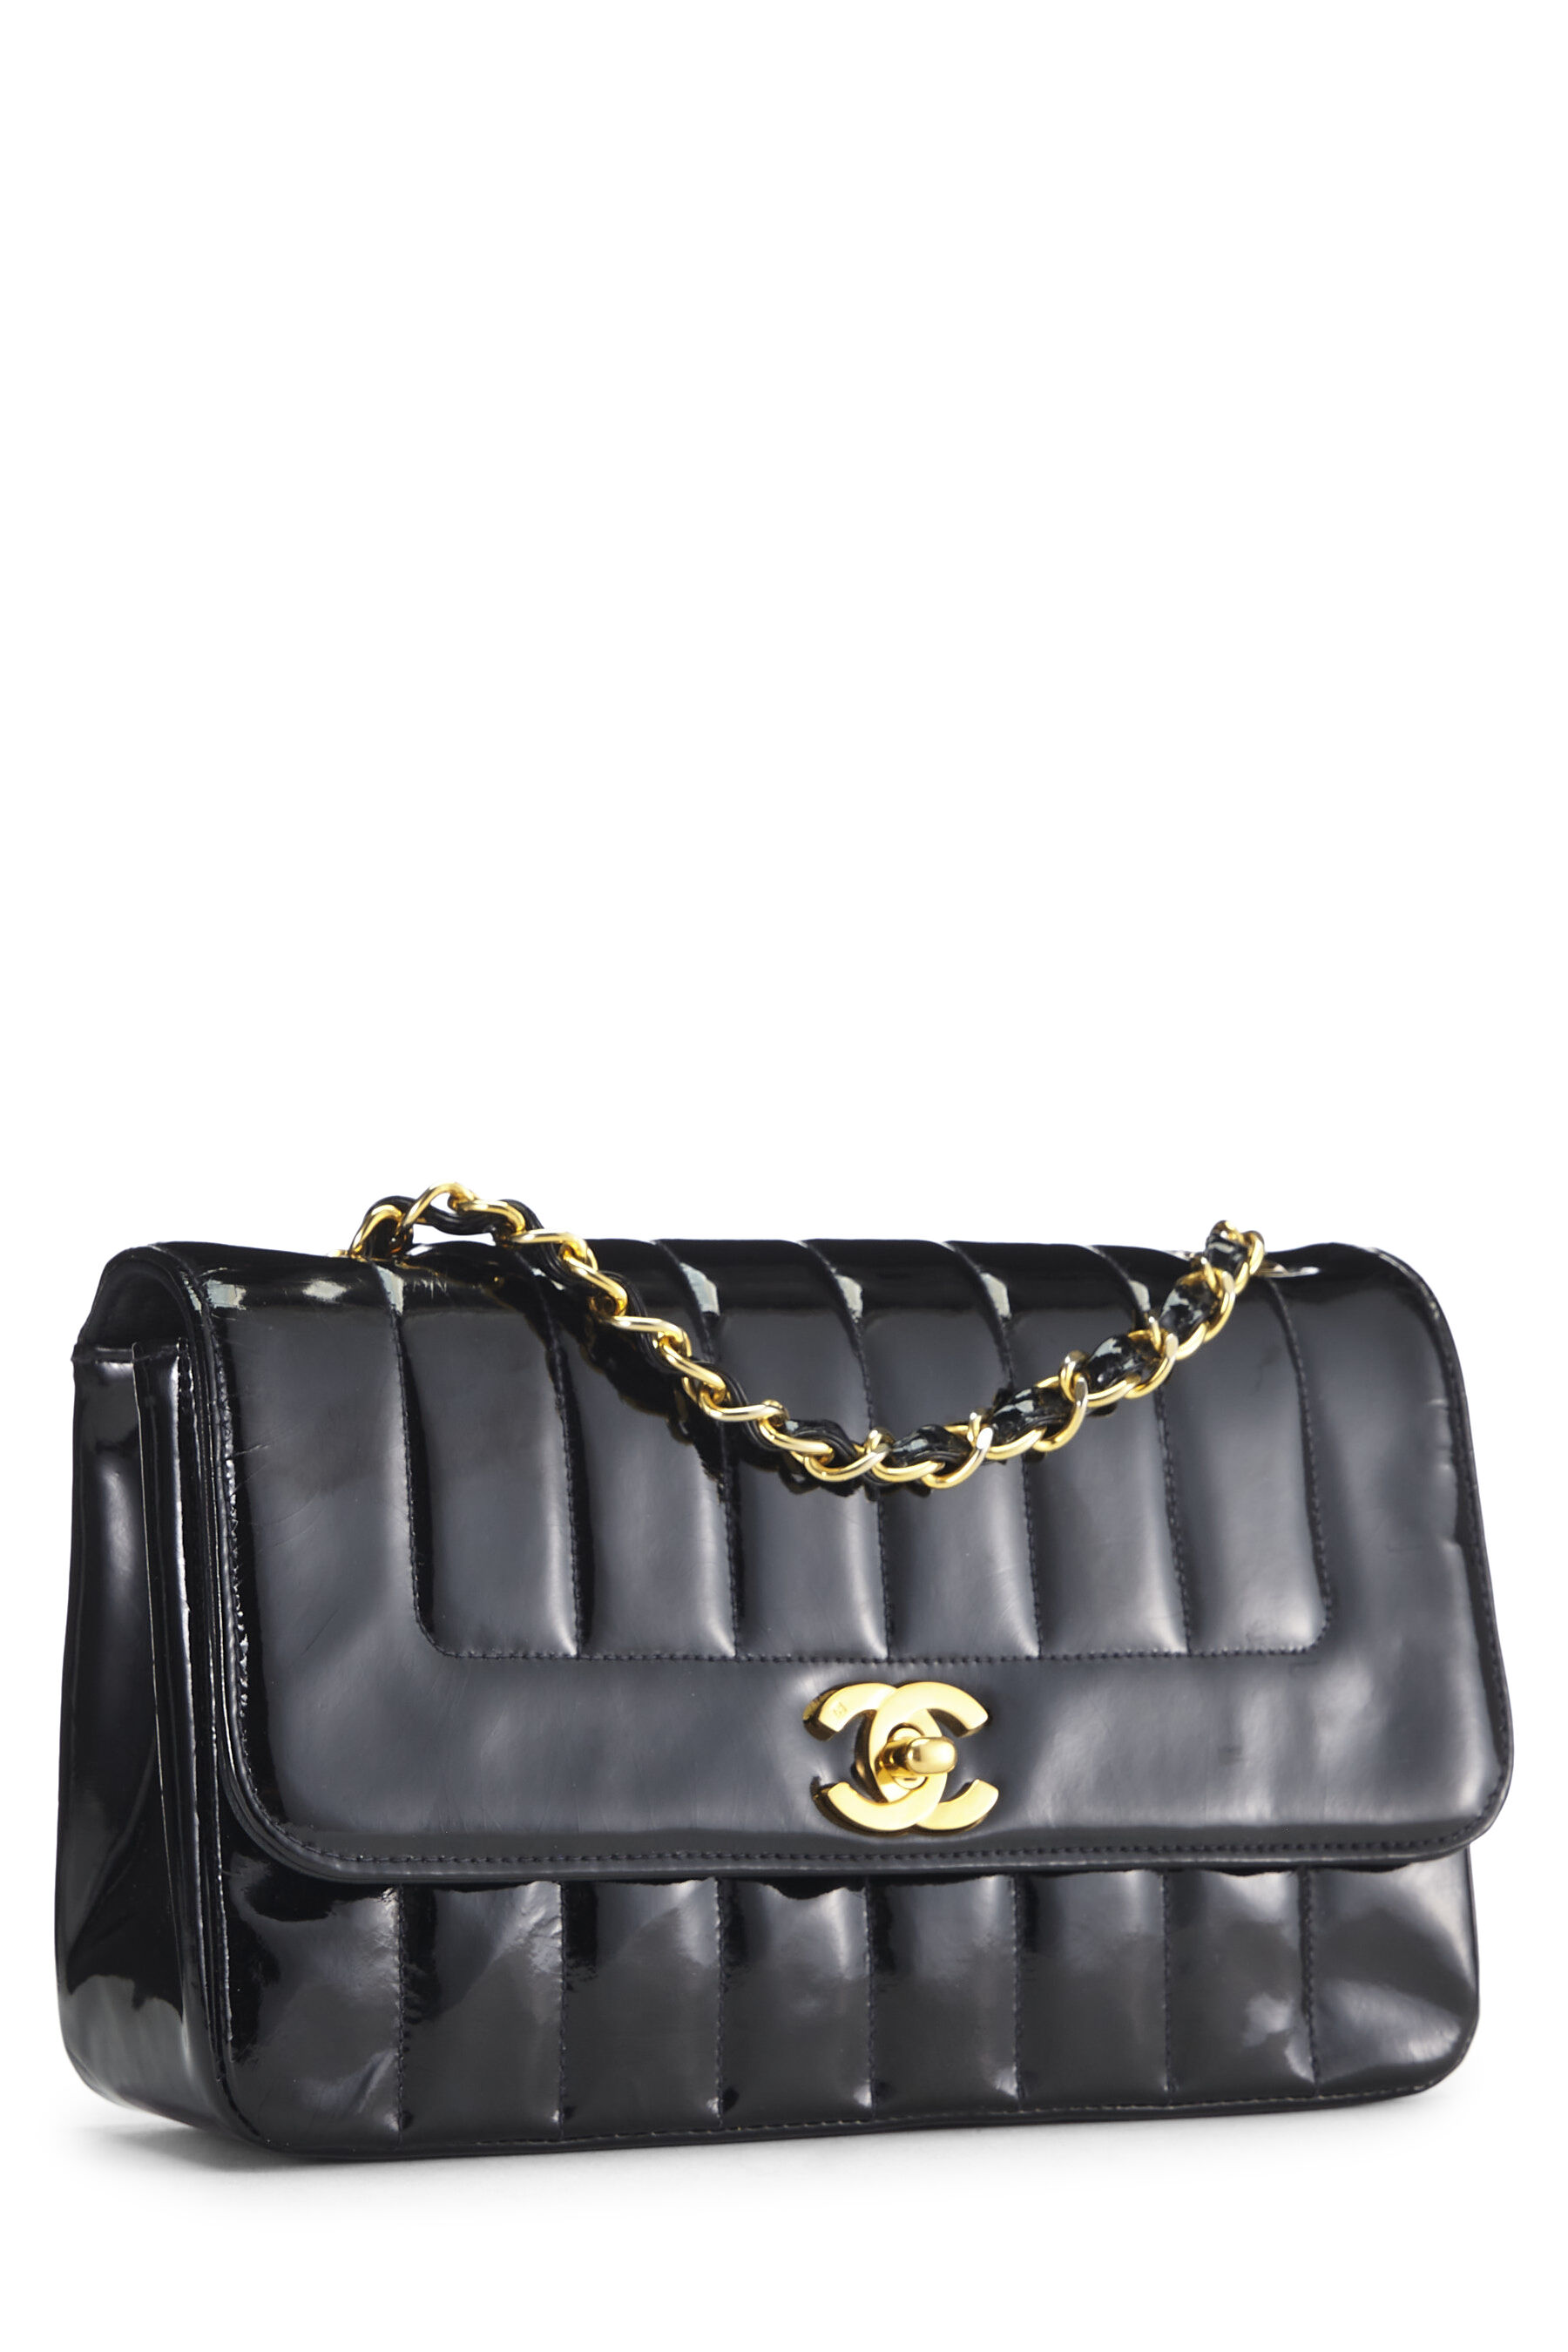 CHANEL Patent Vertical Quilted Mini Rectangular Flap Black 628118